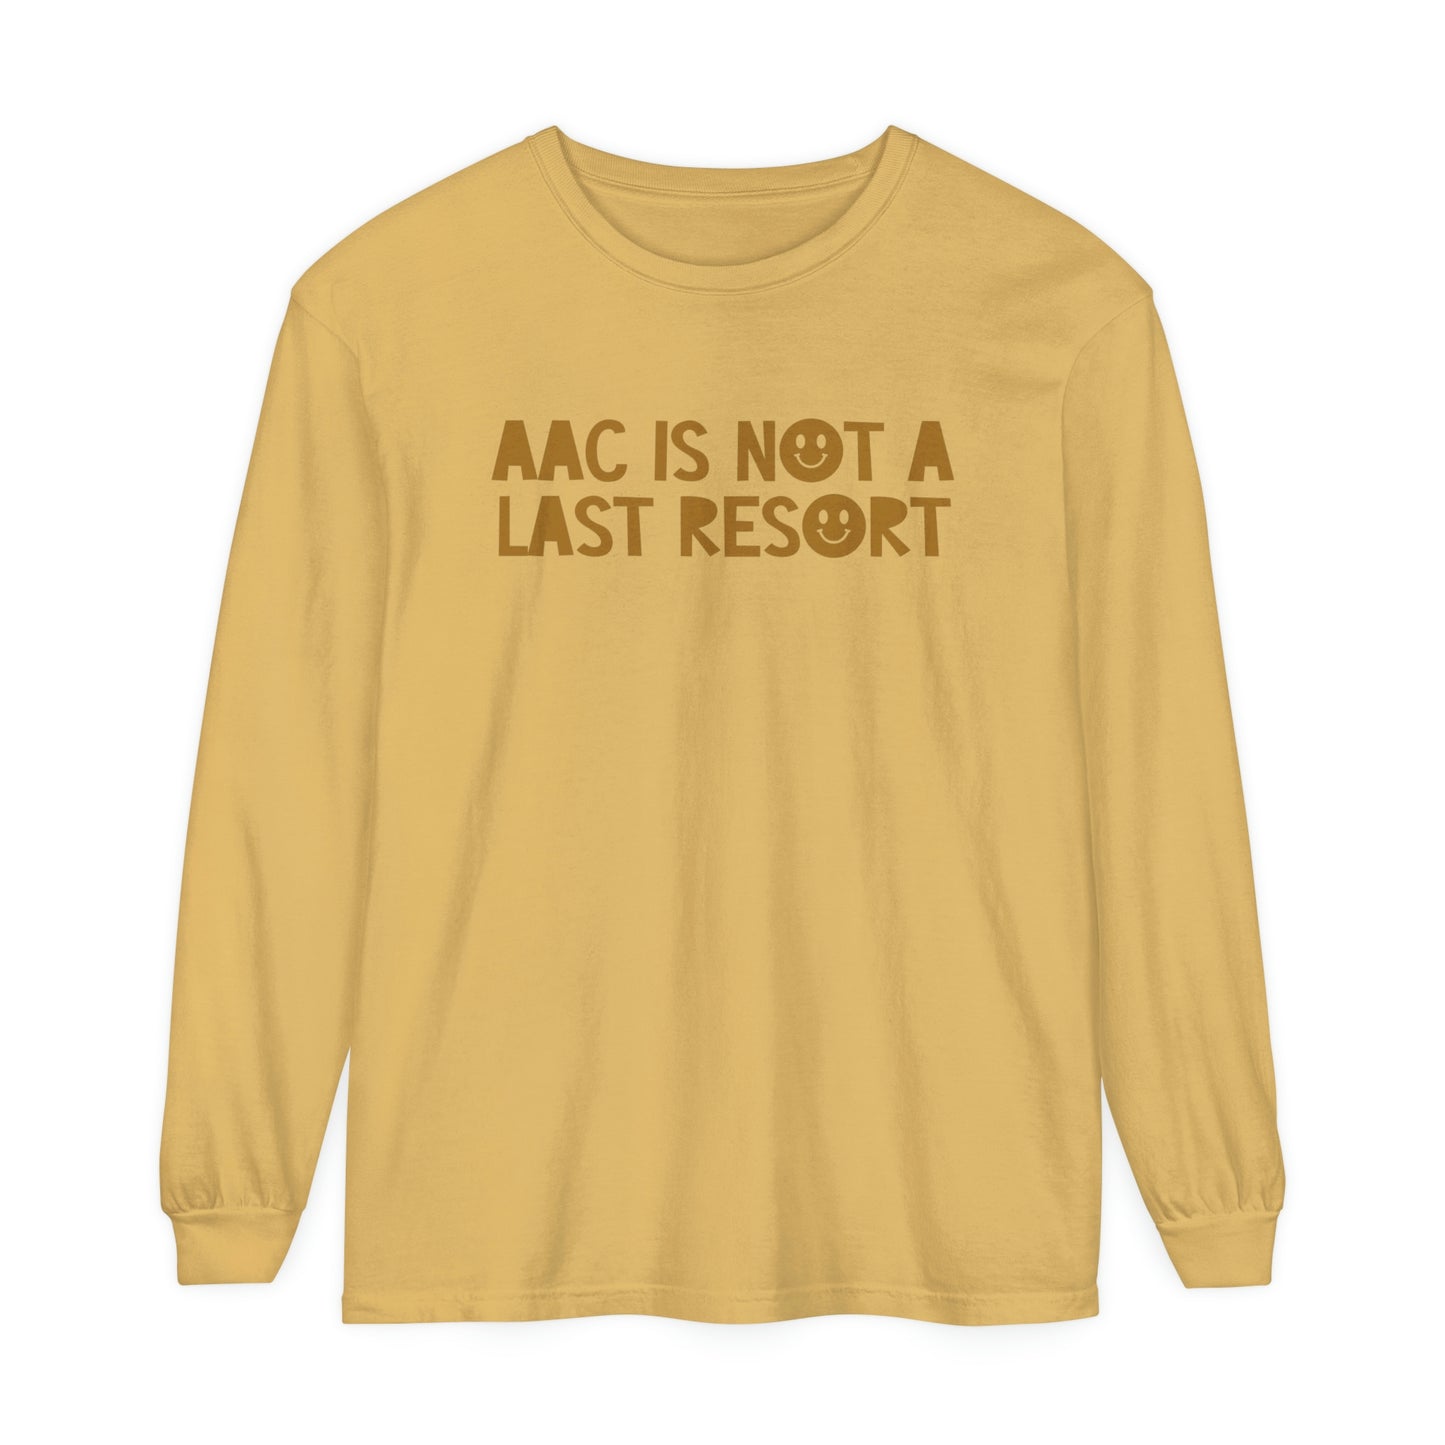 AAC Is Not a Last Resort Long Sleeve Comfort Colors T-Shirt